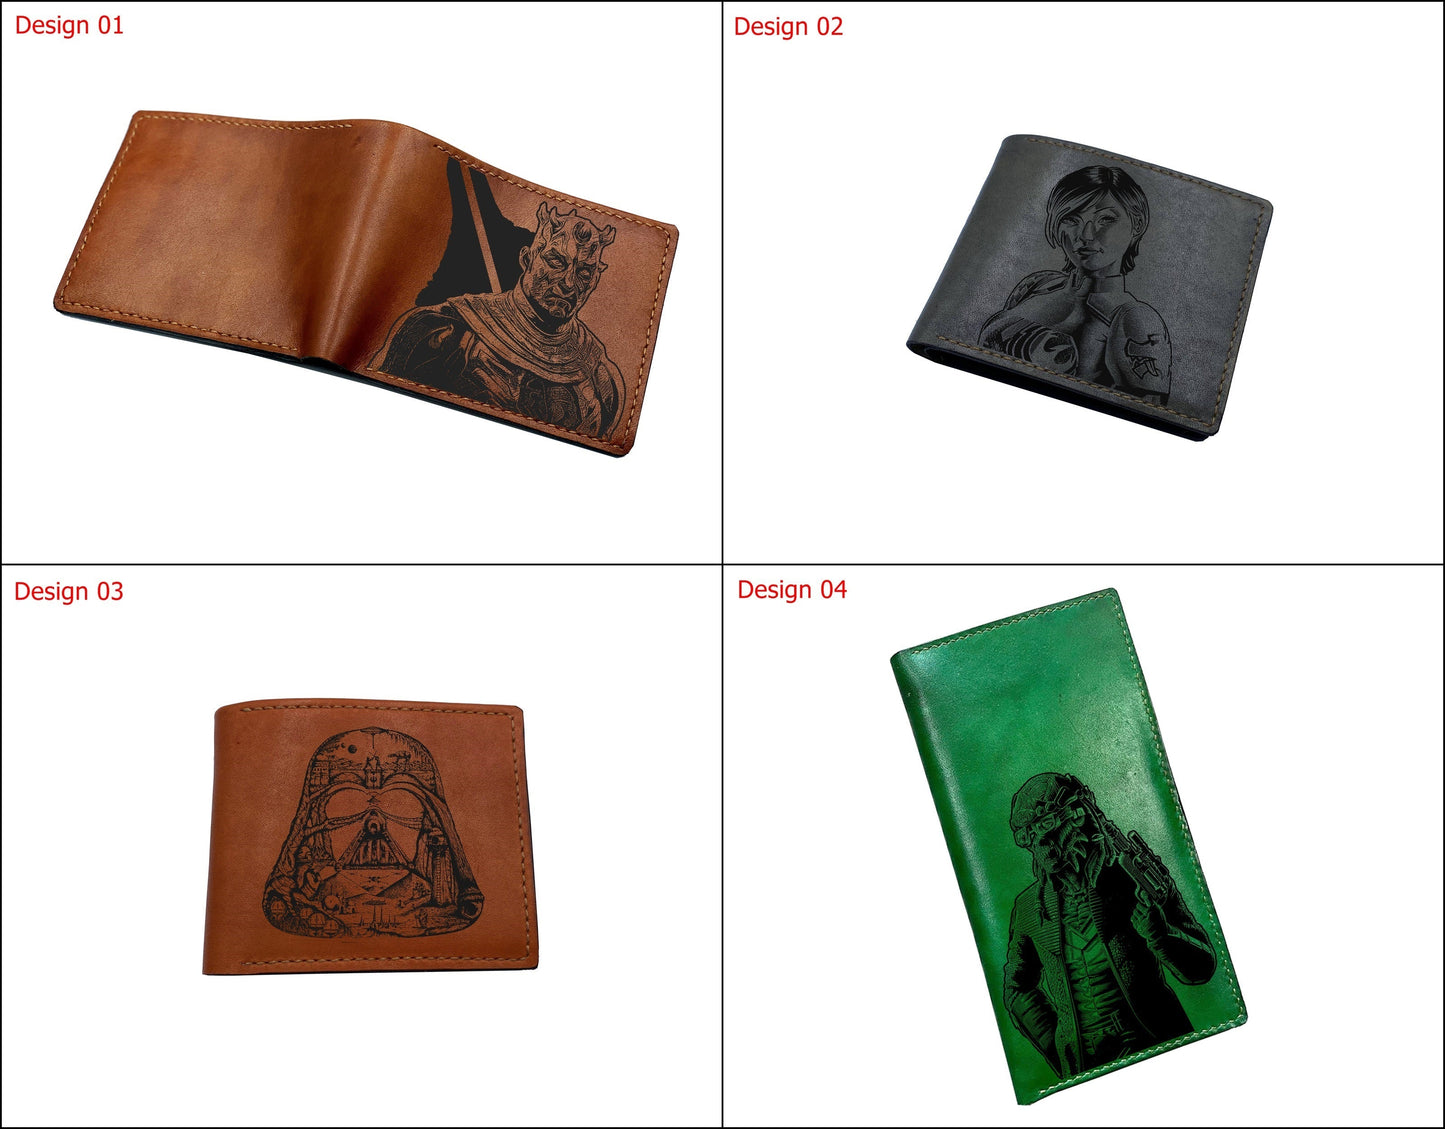 Leather anniversary present ideas for hiim, Starwars characters drawing art wallet, cool wallet for husband from wife